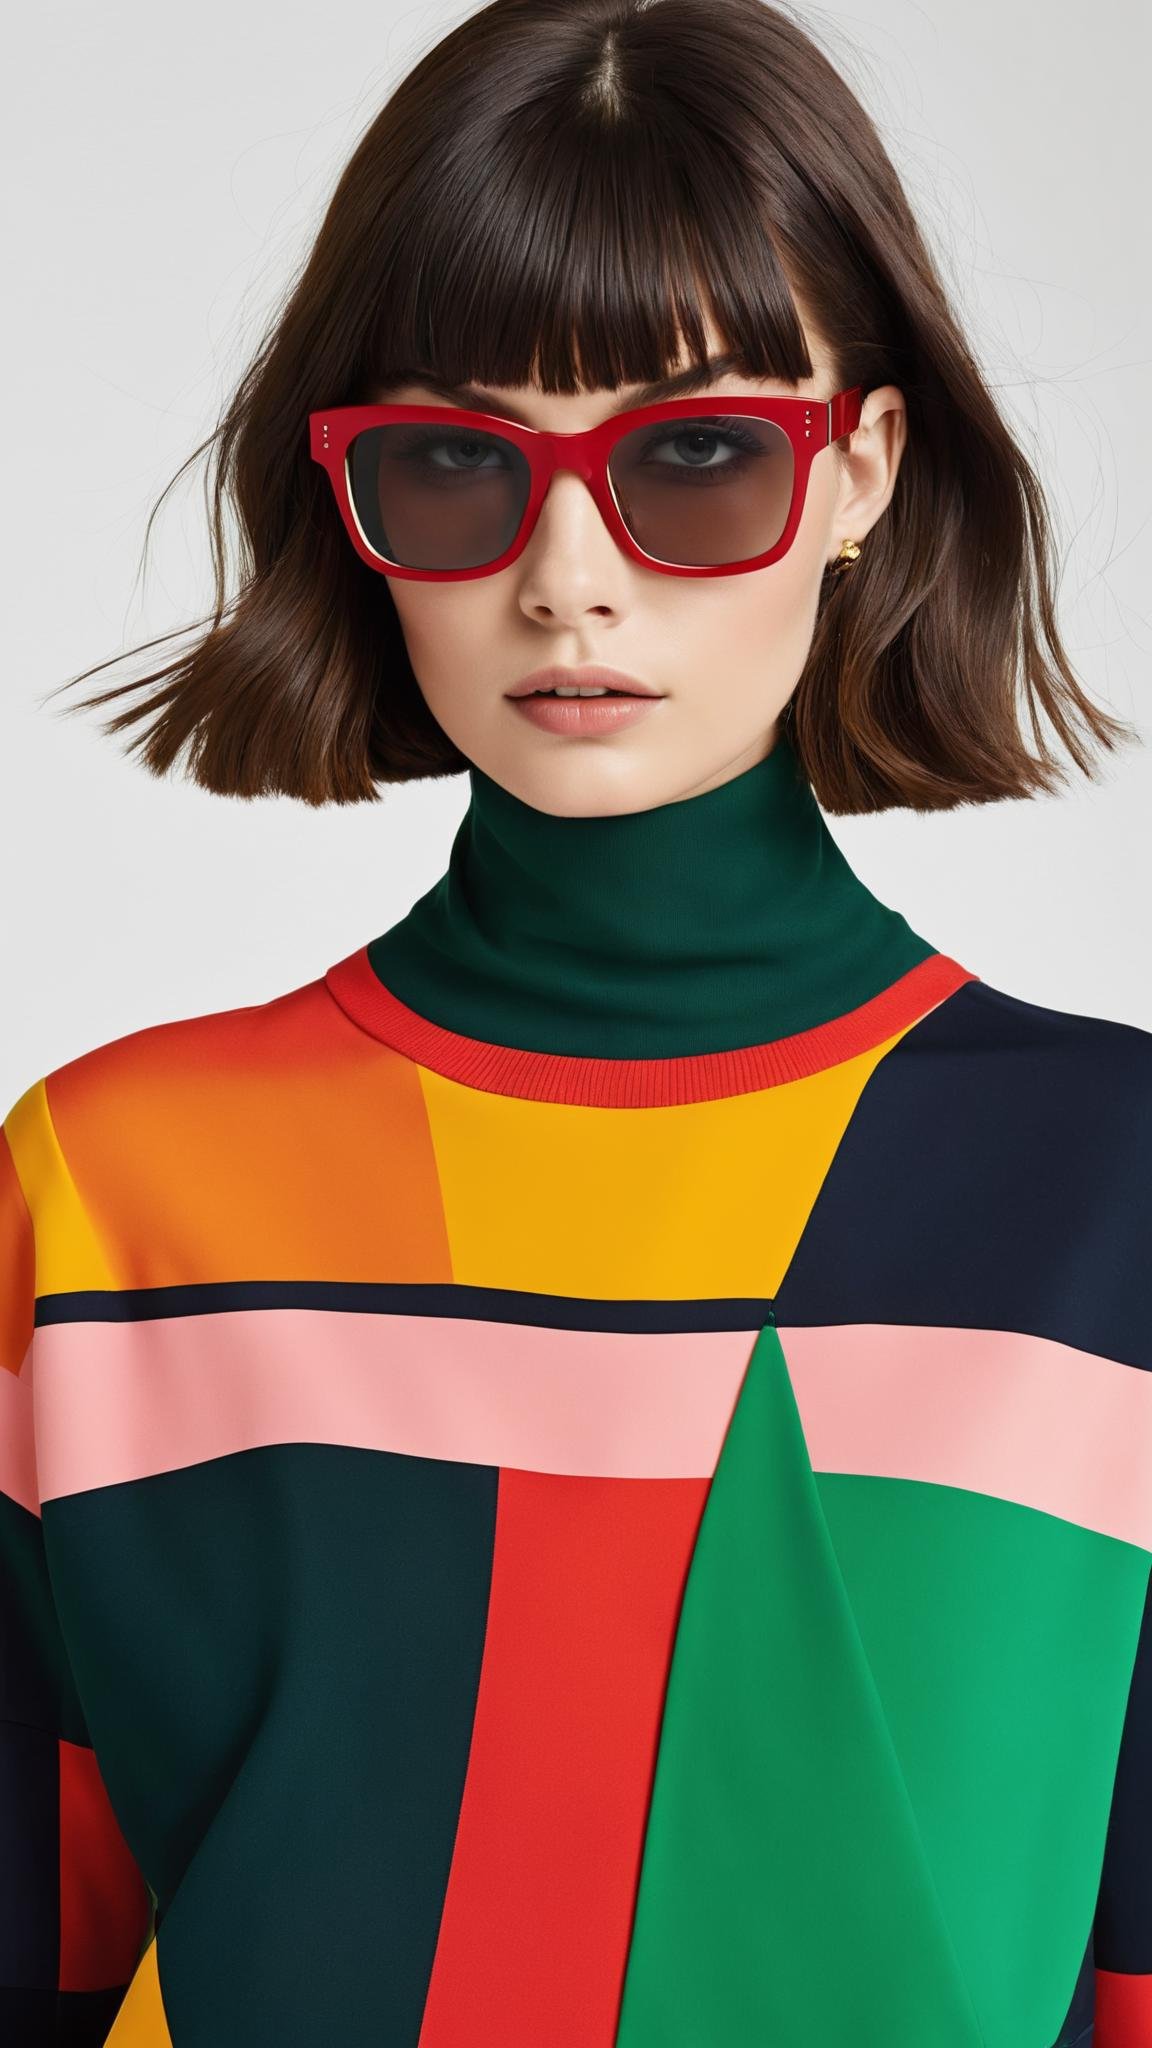 Iconic square frames reminiscent of the 1960s mod fashion scene, updated with bold, contrasting color blocks that exude a lively, pop culture vibe:1.4.